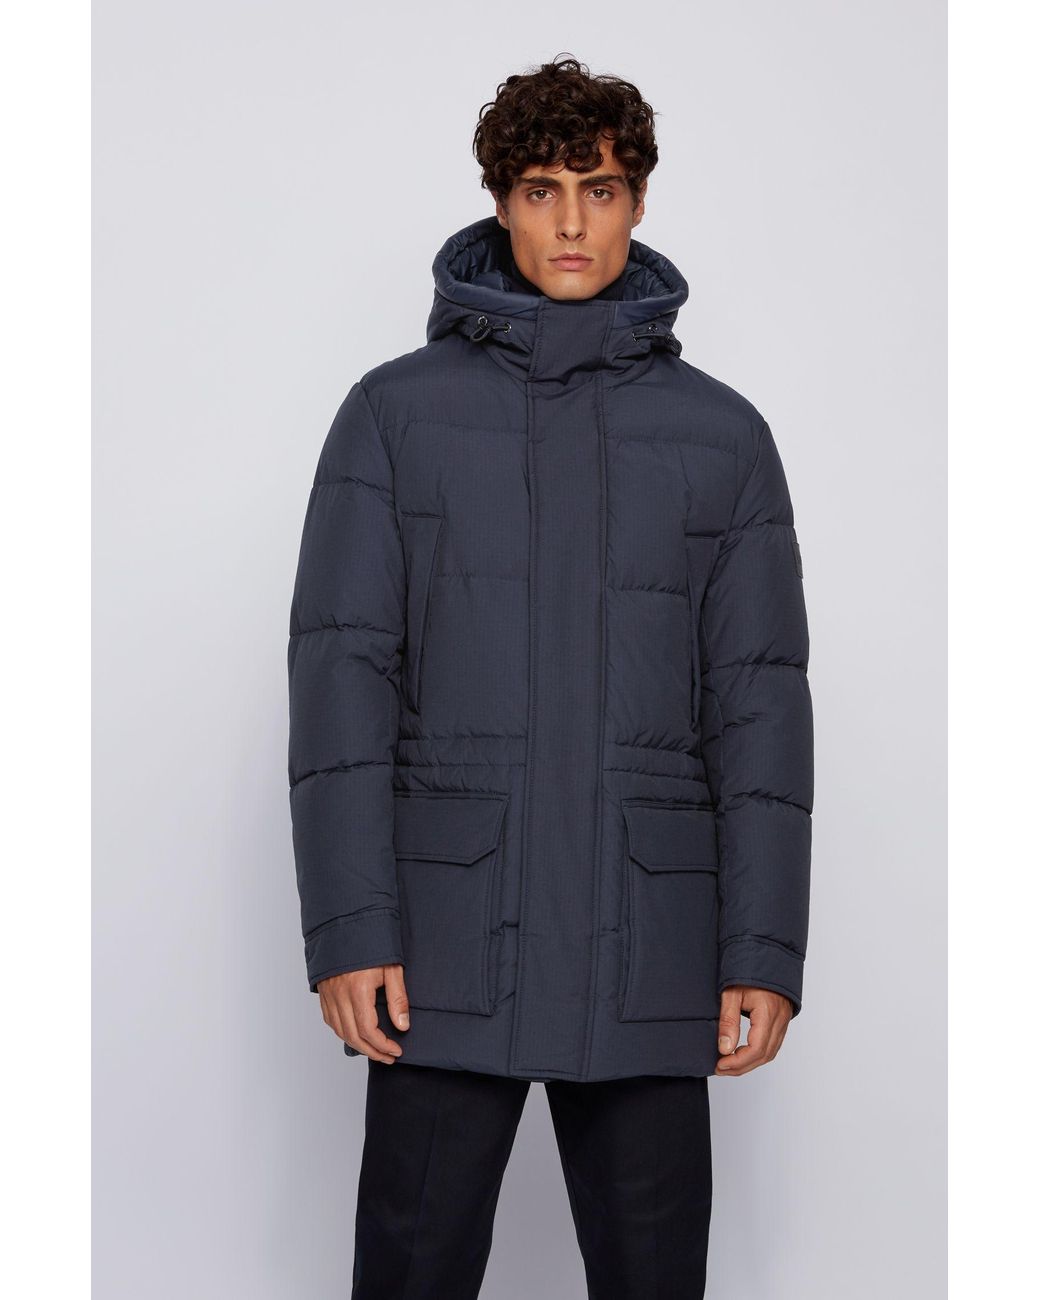 BOSS by Hugo Boss Water Repellent Down Jacket In Cotton Blend Fabric in ...